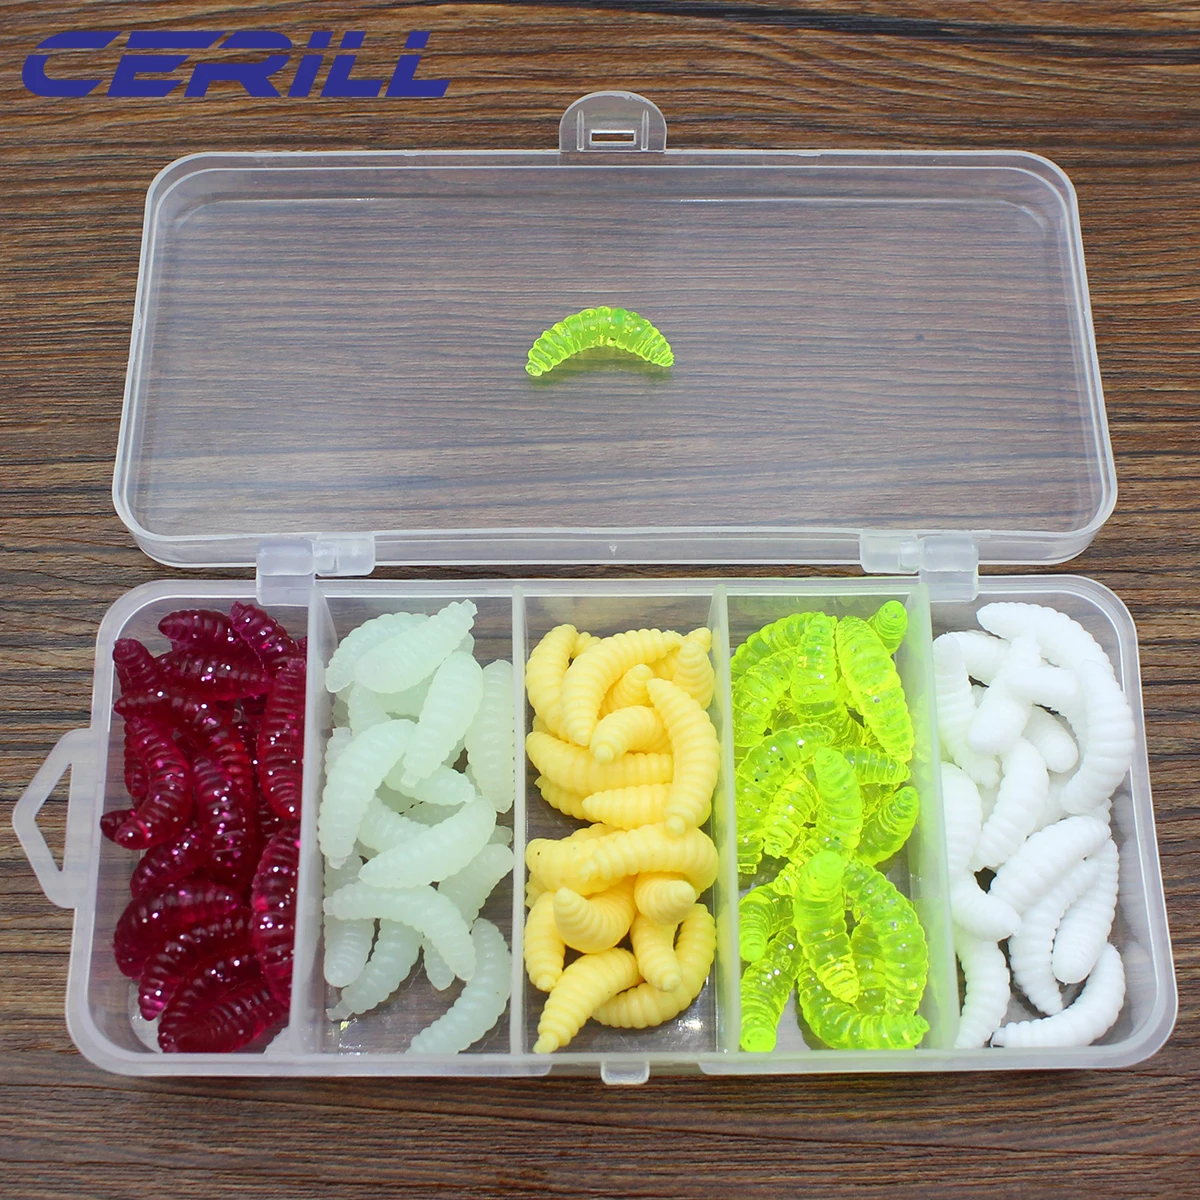 Cerill 100 pcs/kit Smell Soft Baits Worms Luminous Fishing Lure Maggot 20 mm Artificial Silicone Carp Bass Fishing Accessories